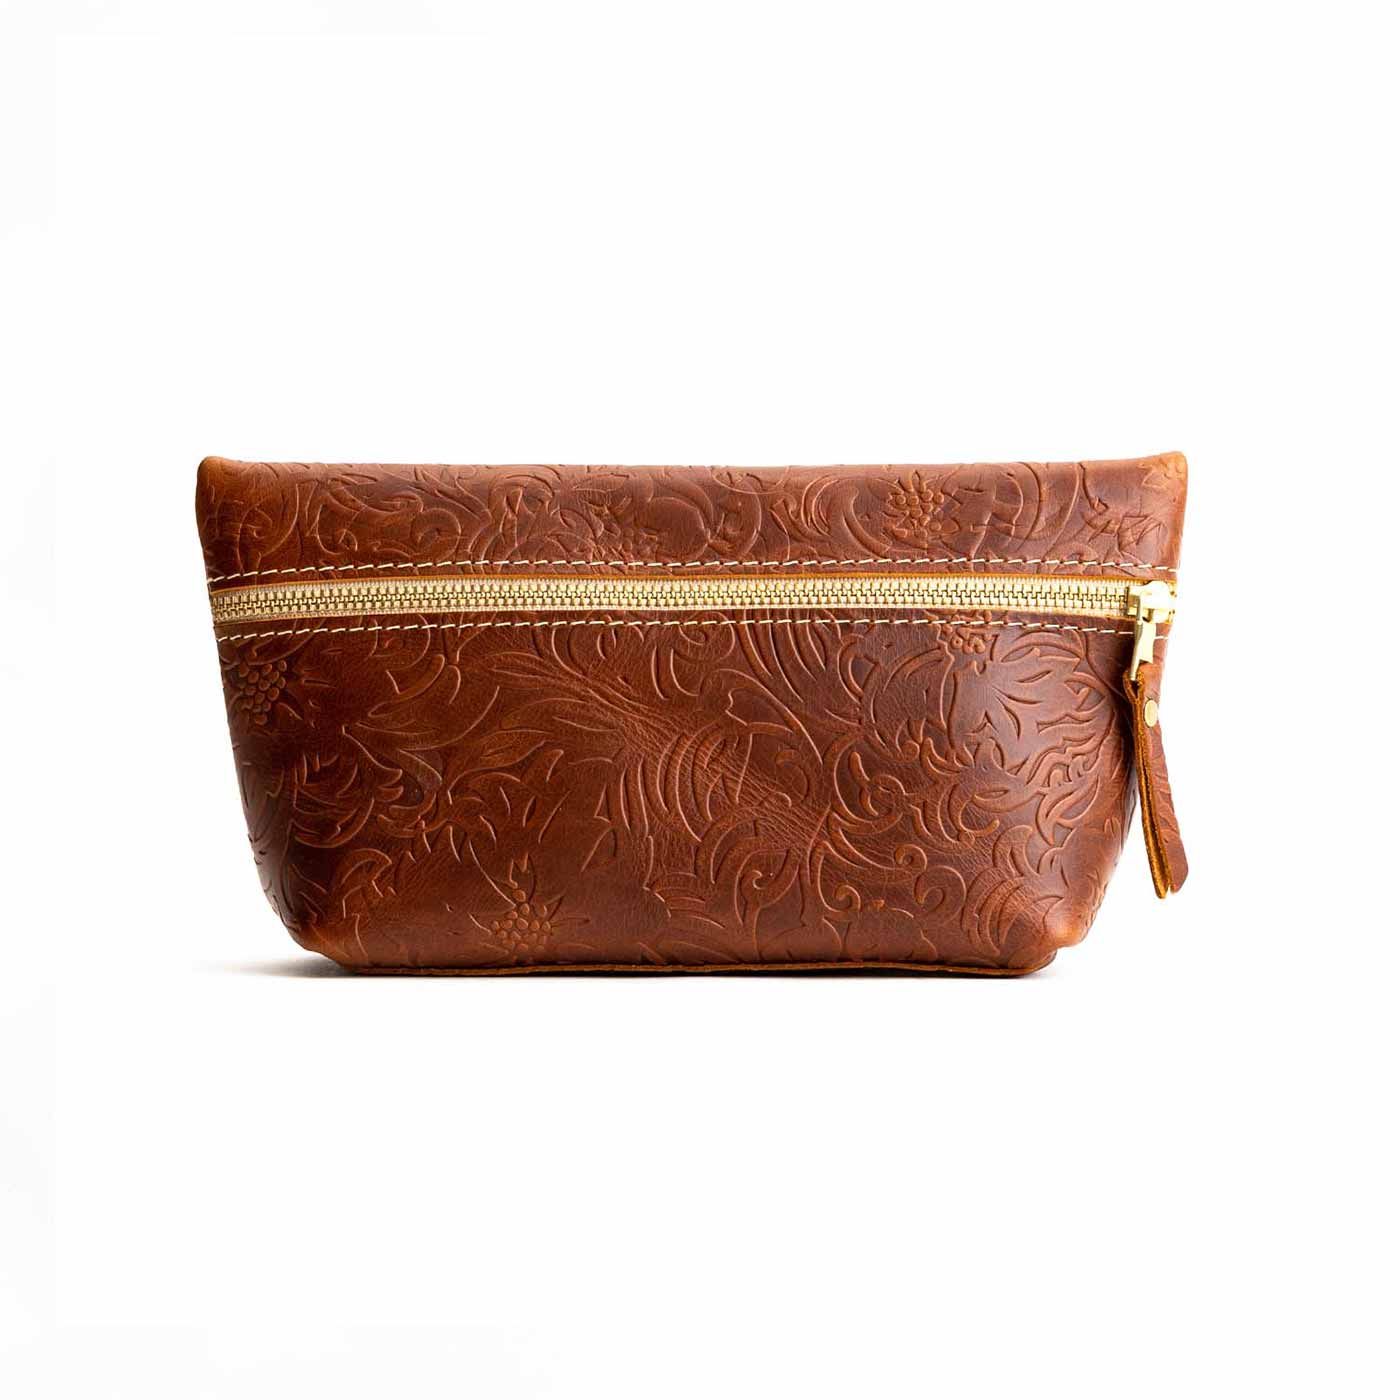 Portland Leather Goods  Handmade Leather Products from Portland, OR